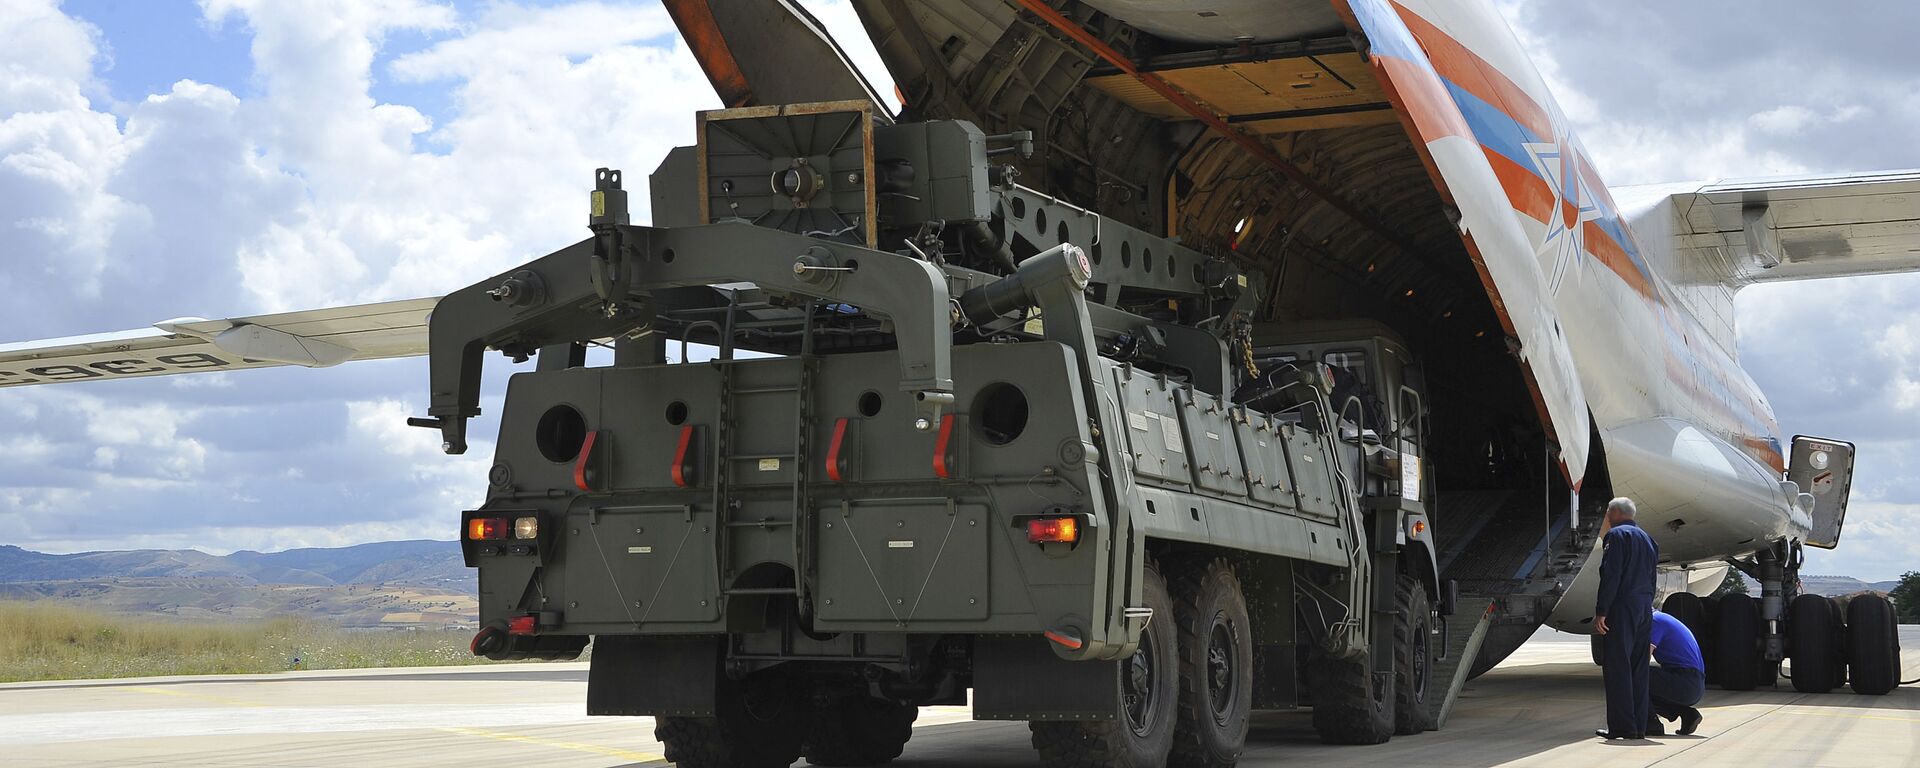 Military vehicles and equipment, parts of the S-400 air defense systems, are unloaded from a Russian transport aircraft, at Murted military airport in Ankara, Turkey, Friday, July 12, 2019 - Sputnik International, 1920, 24.04.2022